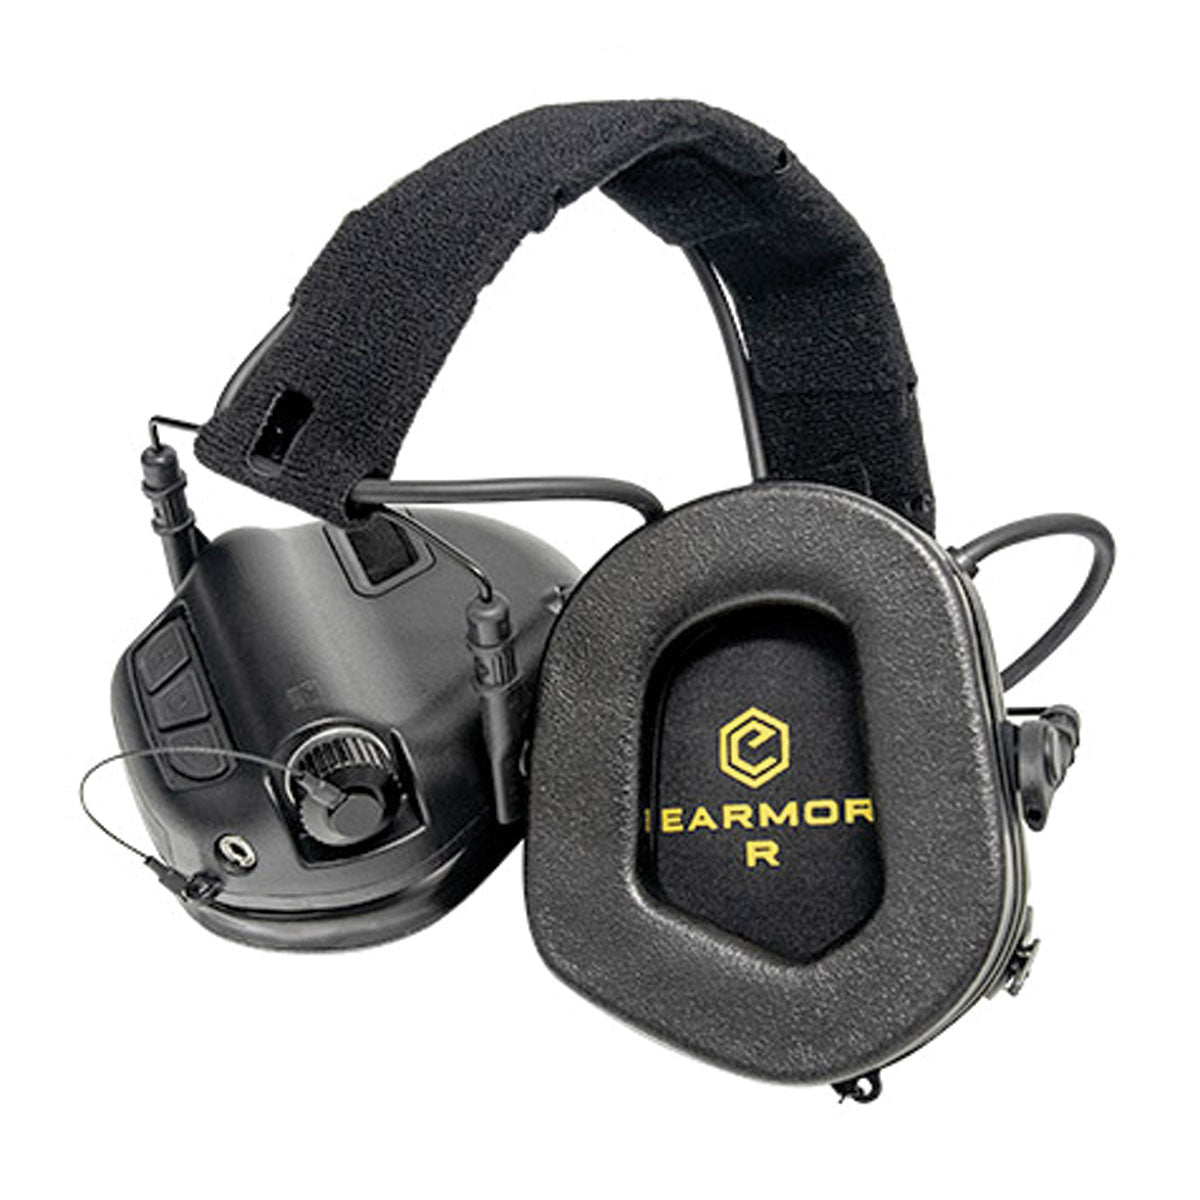 Earmor M31 MARK3 MilPro tactical headset Hearing Protection Earmor Tactical Gear Supplier Tactical Distributors Australia